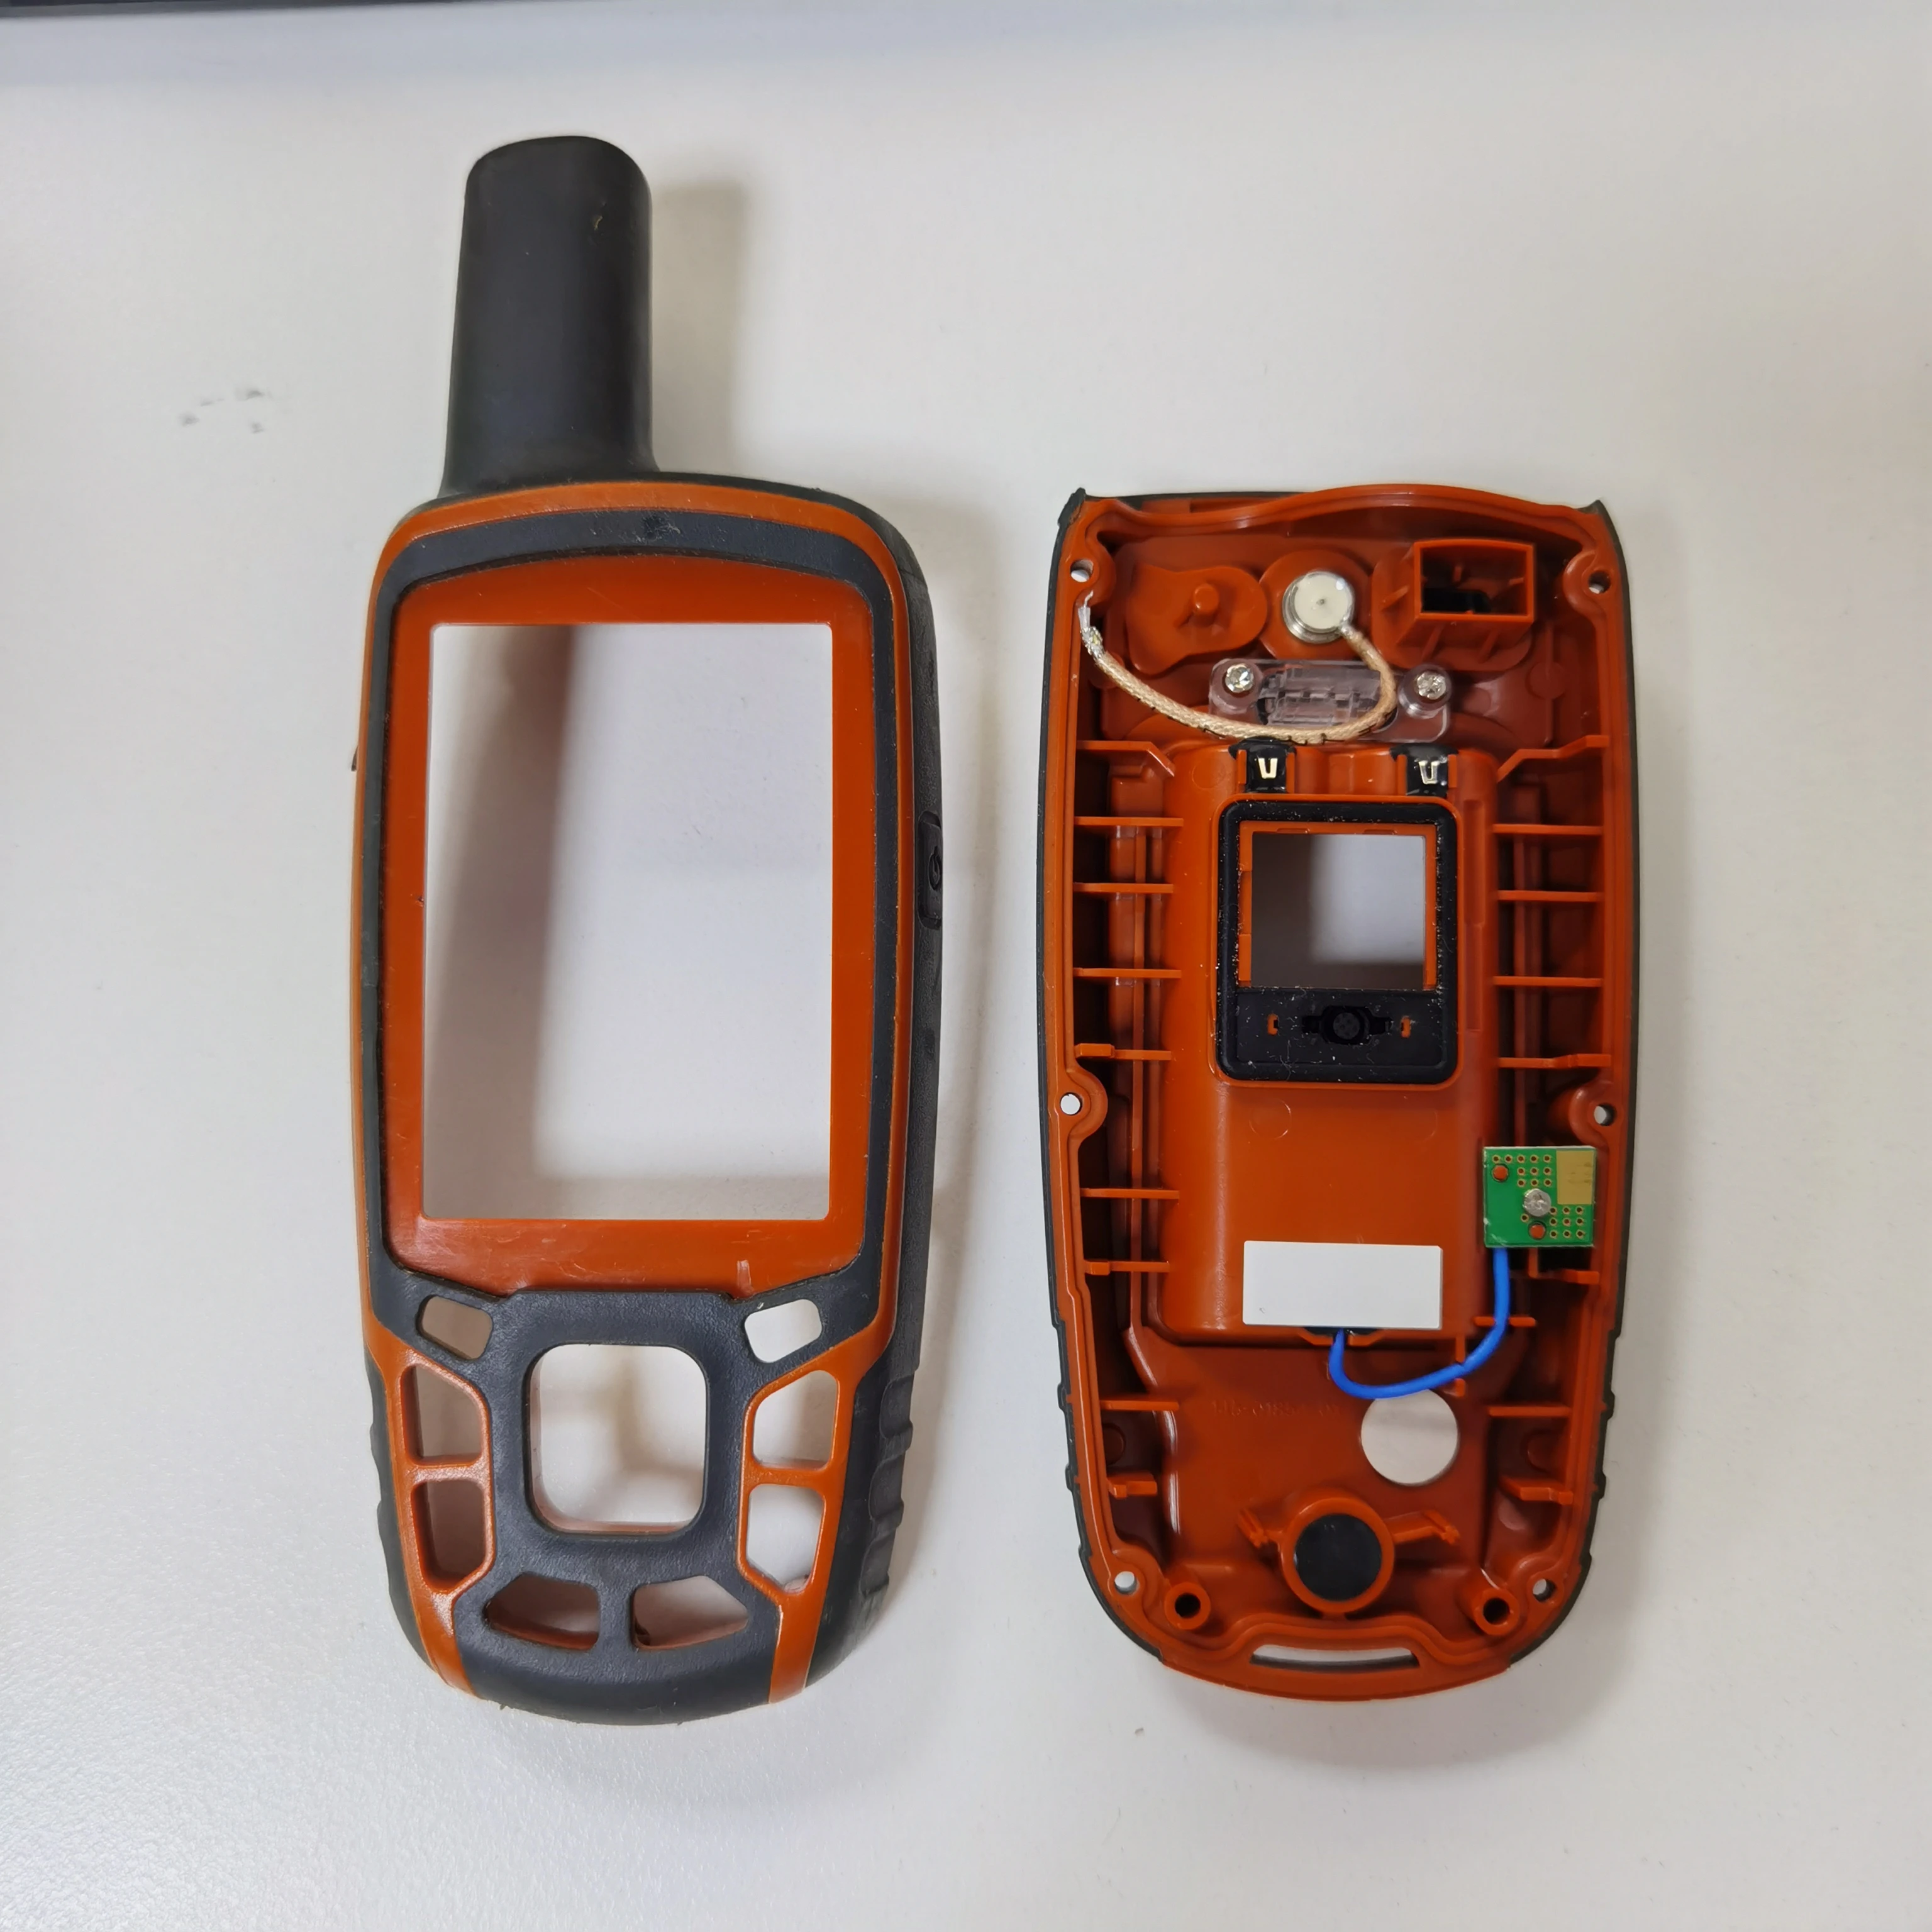 For Garmin Gpsmap 62 62sc 62st 62s 64 64s 64st 64sj Handheld Gps Housing Shell Front Back Case Repair Replacement Parts(optional - Mobile Phone Lcd - AliExpress